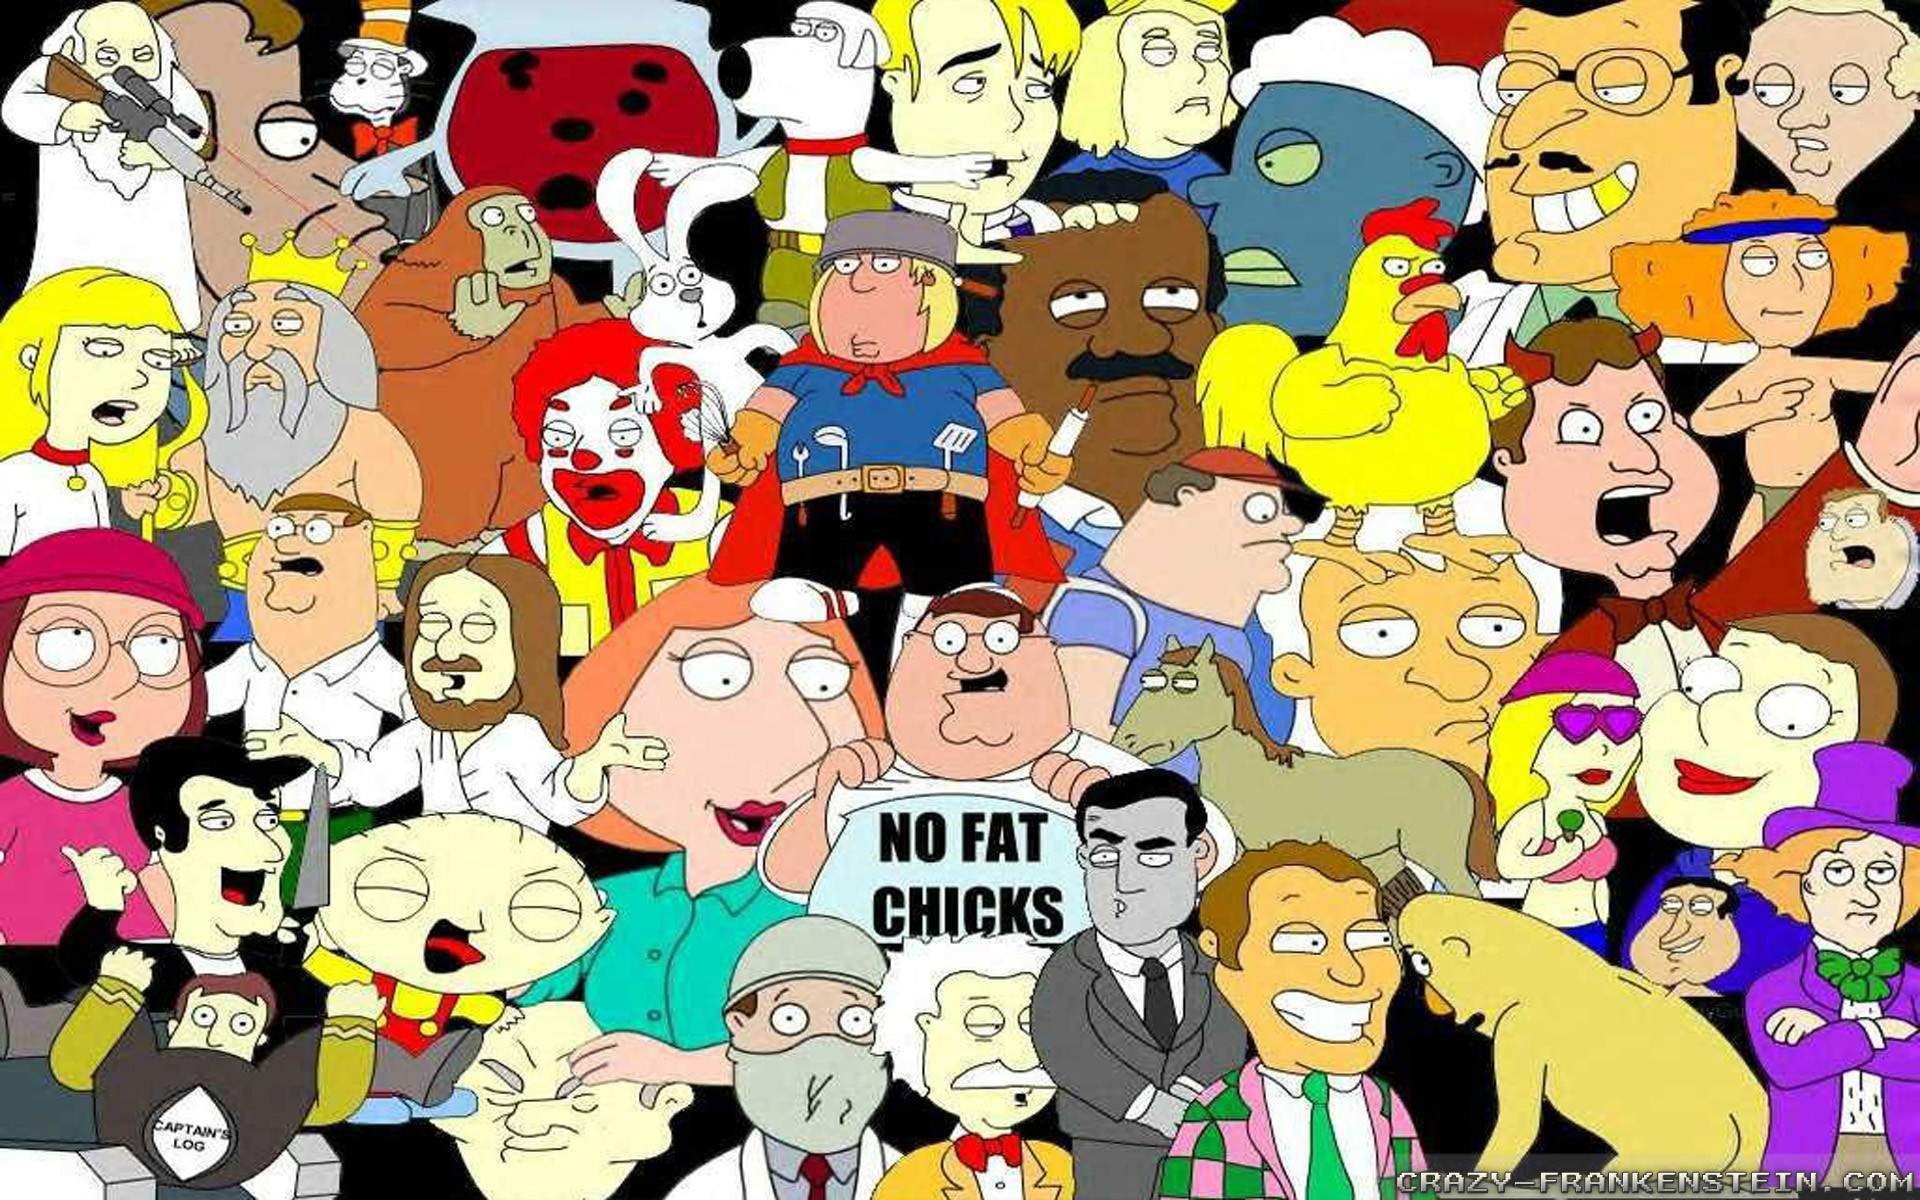 Wallpaper The Family Guy Resolution 1024×768 1280×1024 1600×1200. Widescreen Res 1440×900 1680×1050 1920×1200